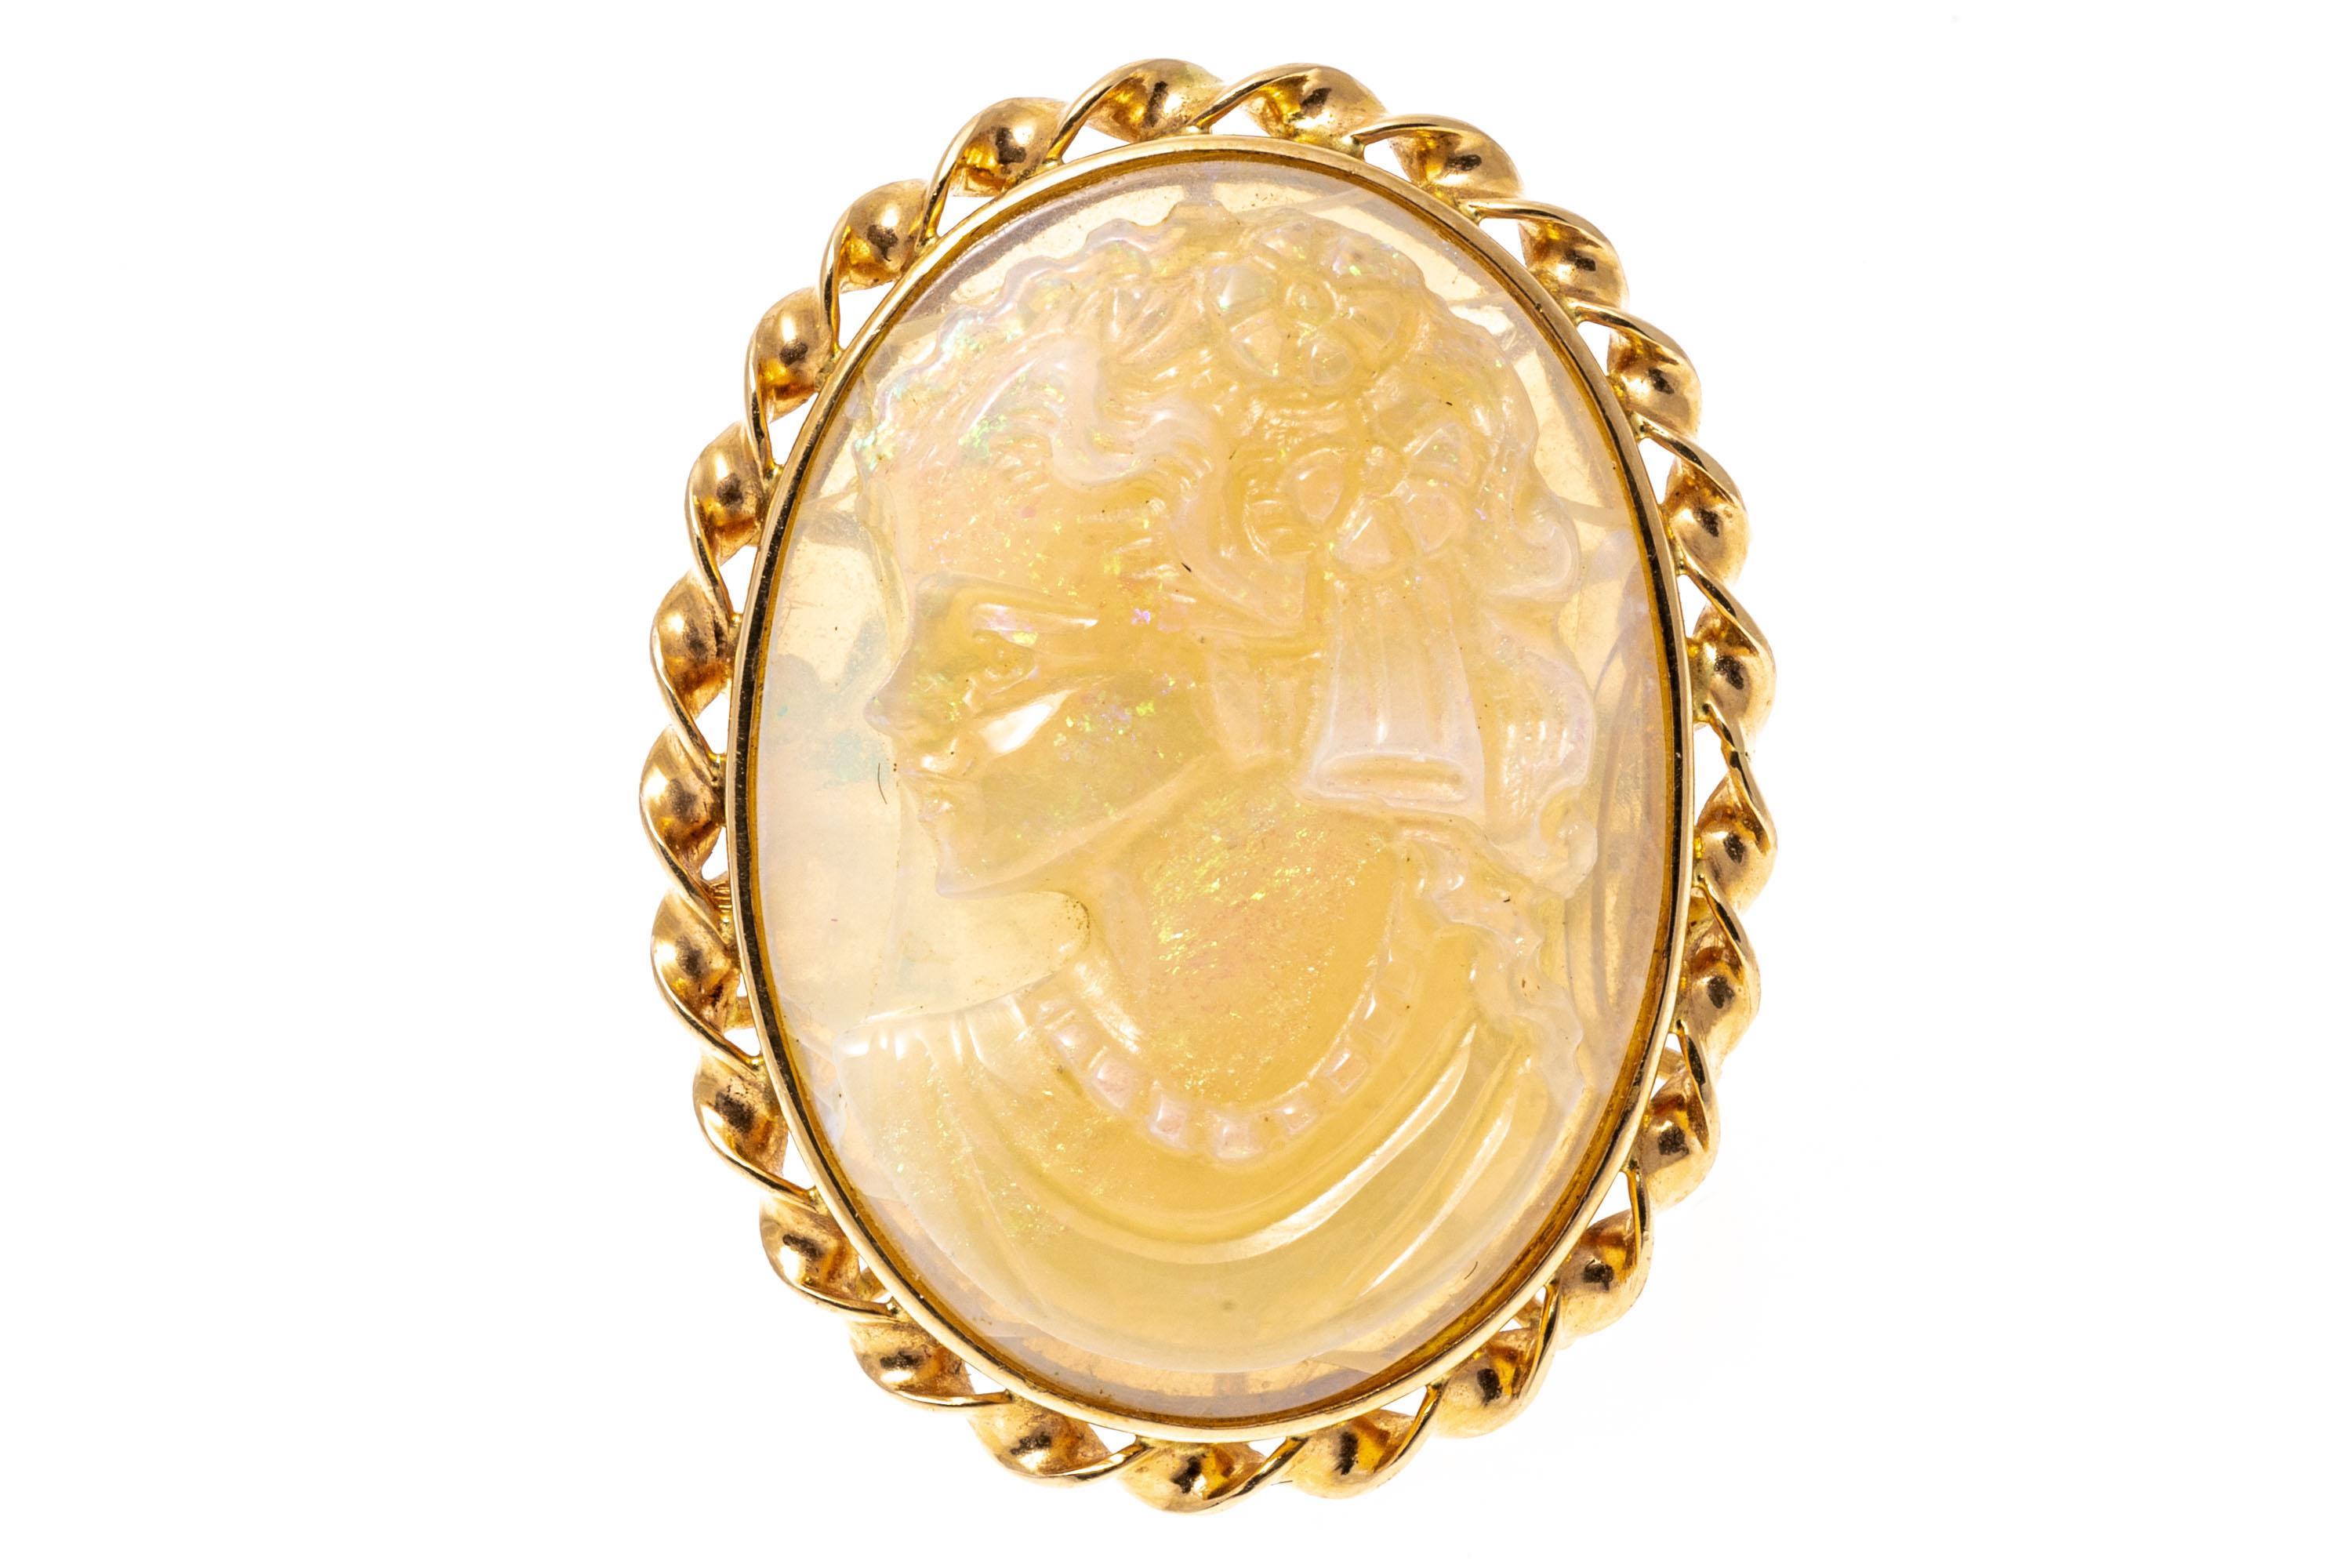 14k yellow gold ring. This beautiful, unusual vintage oval cameo ring is a white opal, with green plays of color, which features a lovely draped profile bust, facing to the left with decorated hair. The cameo is set off with a twisted gold frame,